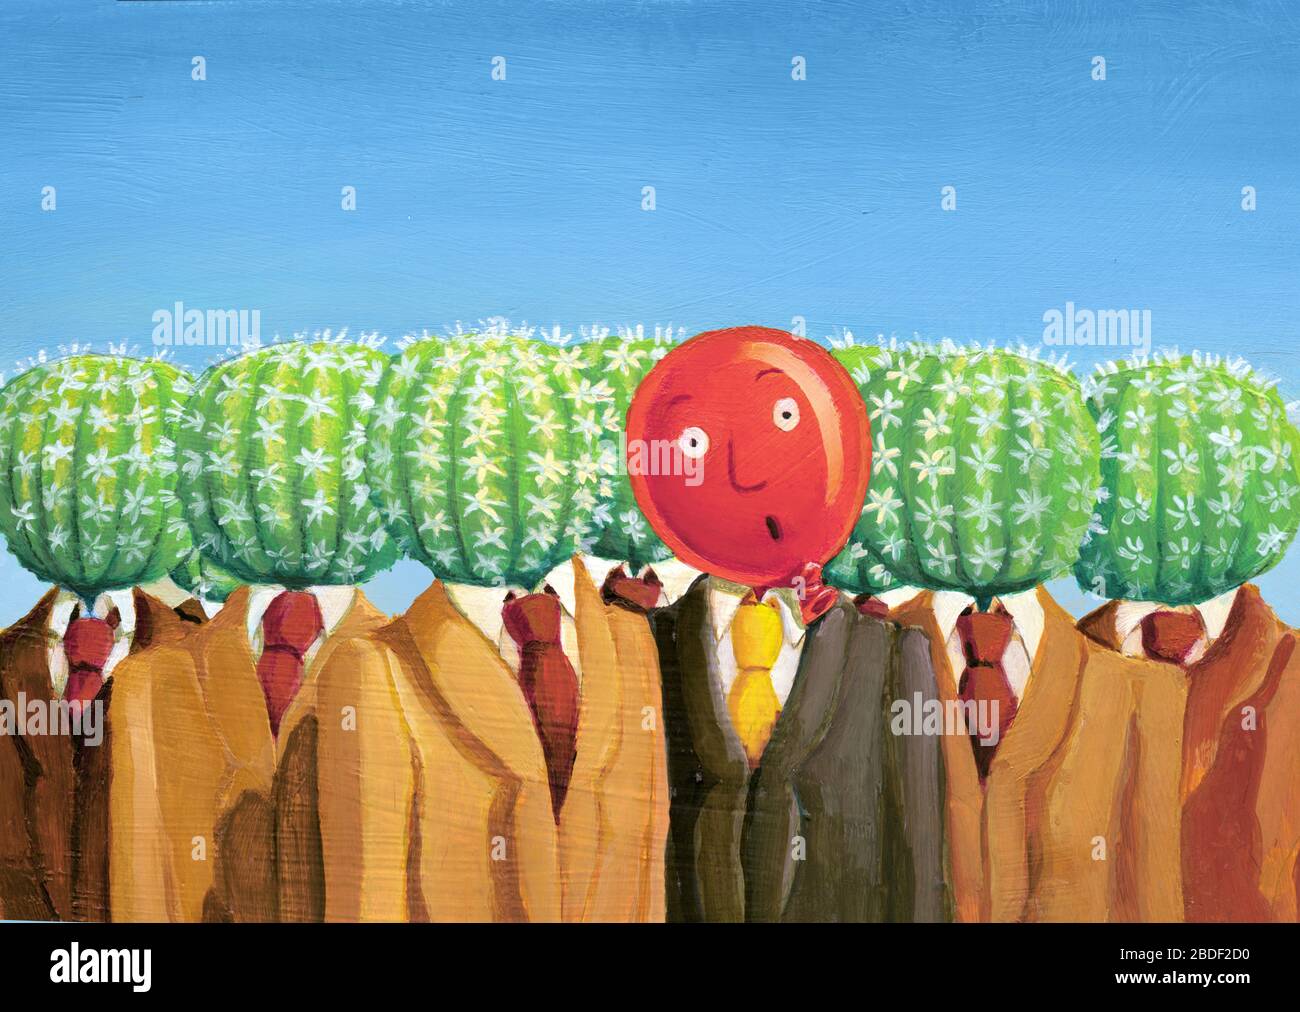 row of person have all the head made by a cactus only a man has the head made by a balloon and has the expression amazed and frightened concept of fra Stock Photo